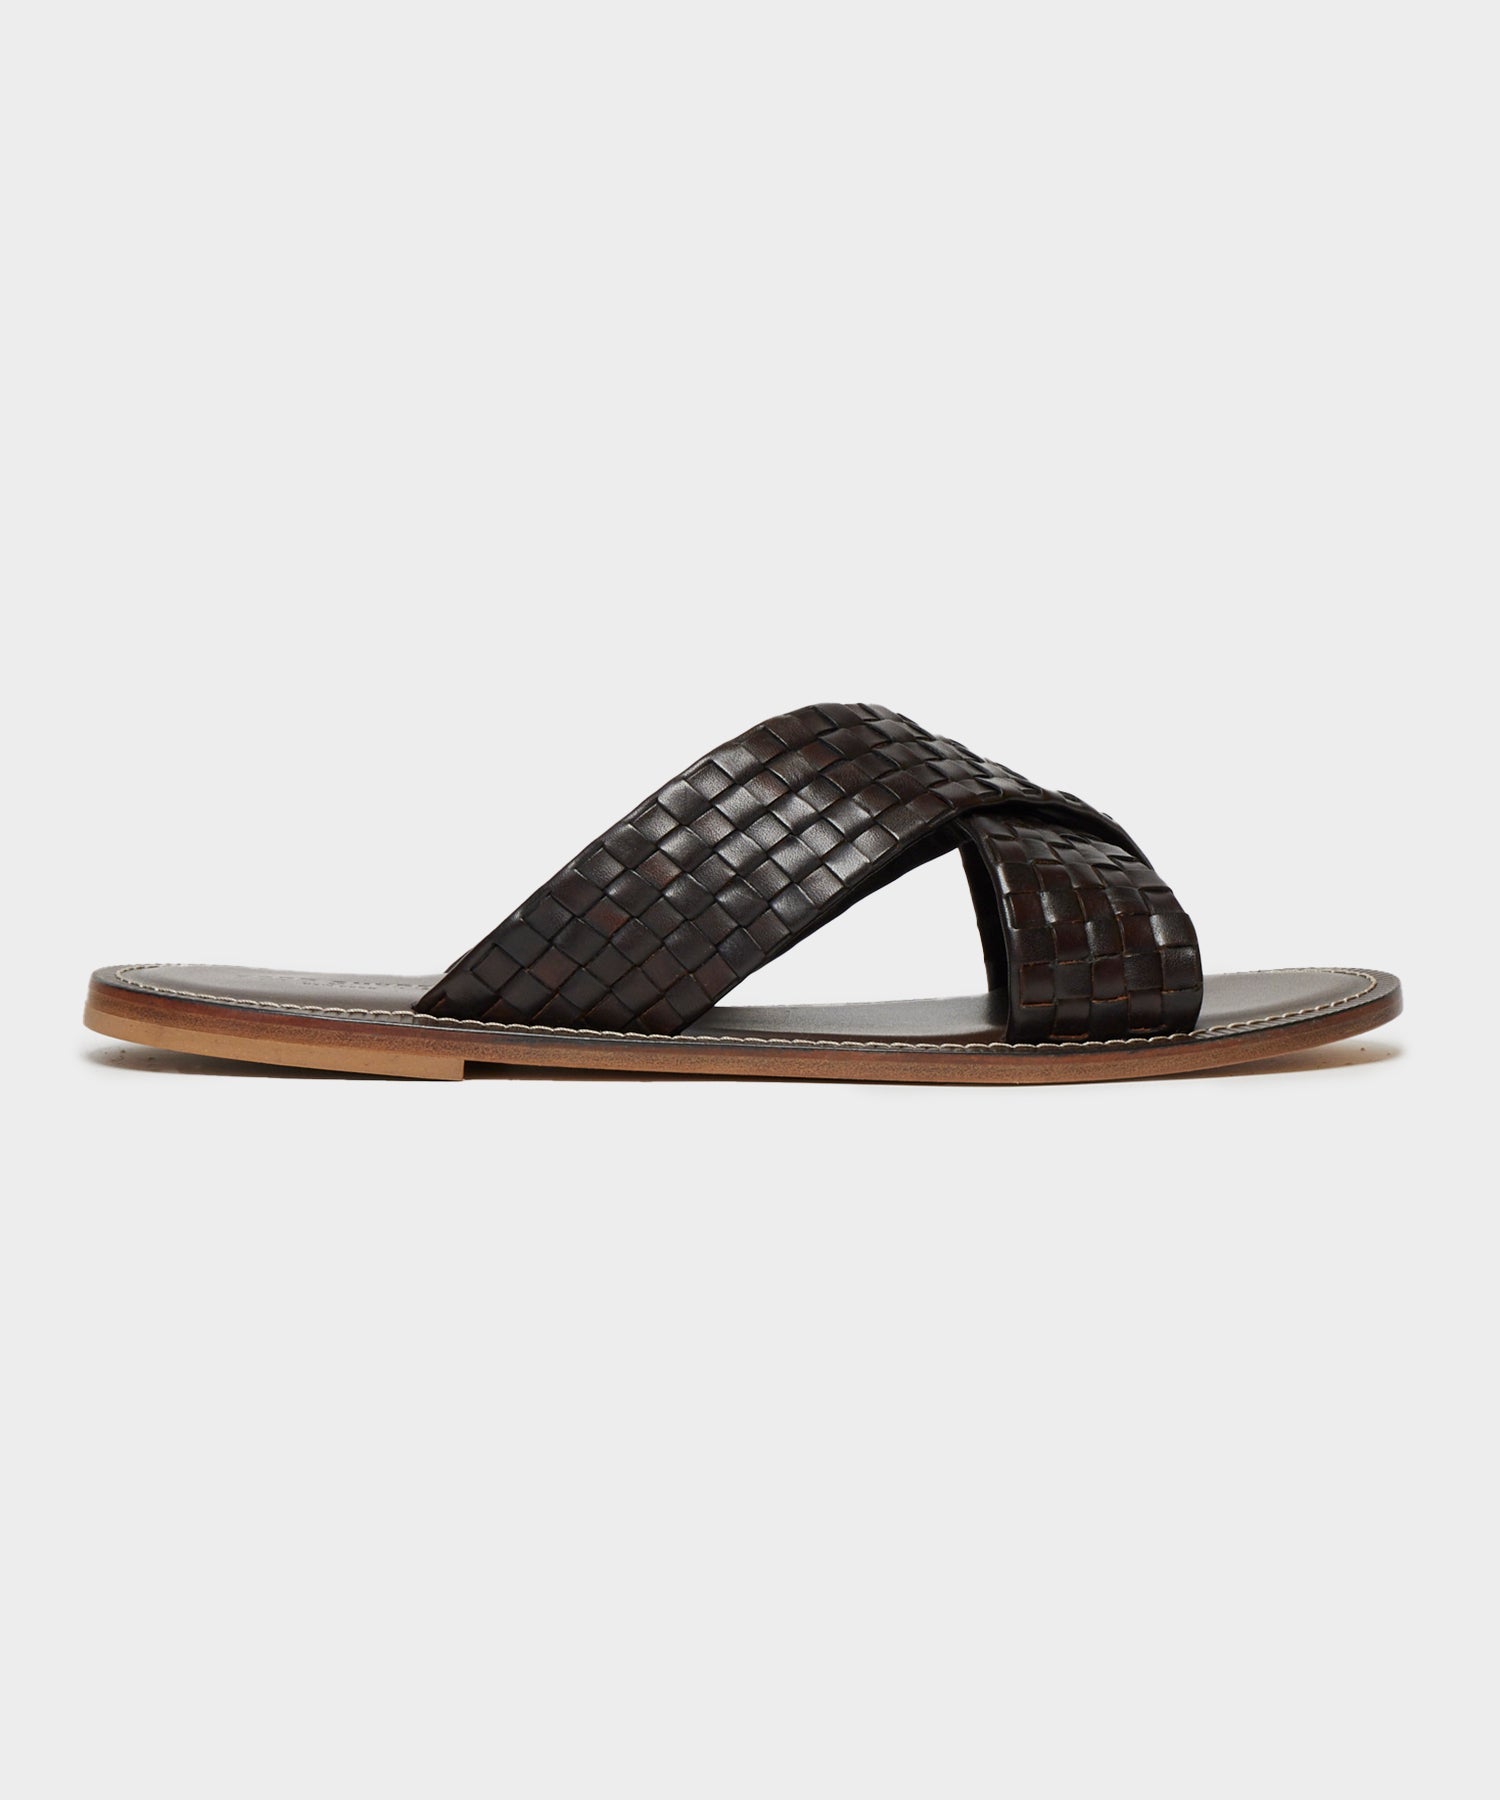 Tuscan Leather Woven Crisscross Sandal in Brown